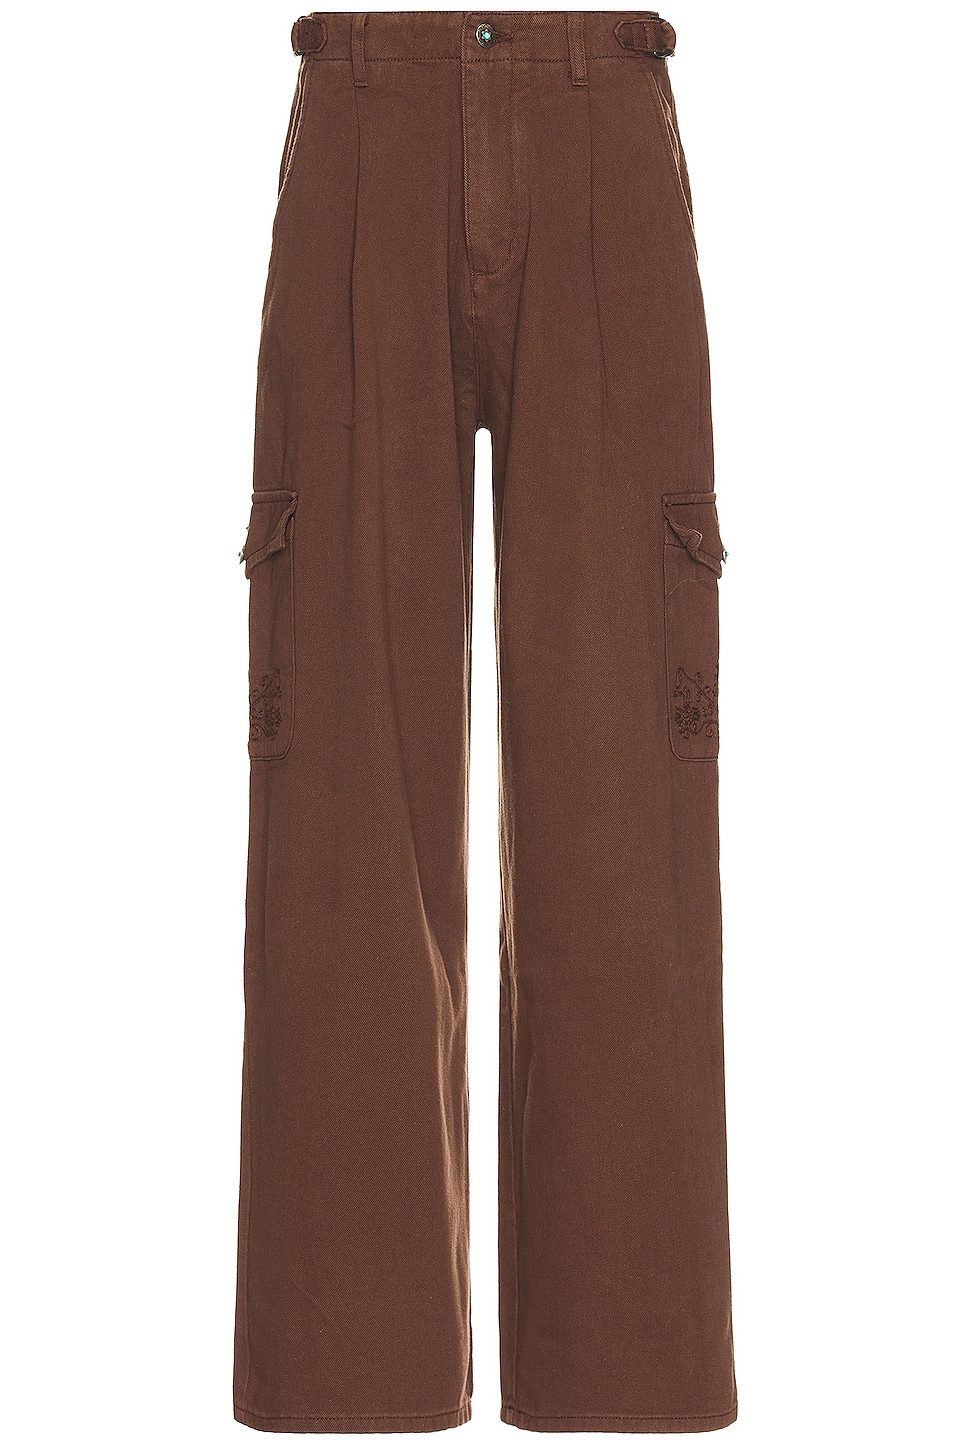 Image 1 of Found Western Cargo Trouser in Brown